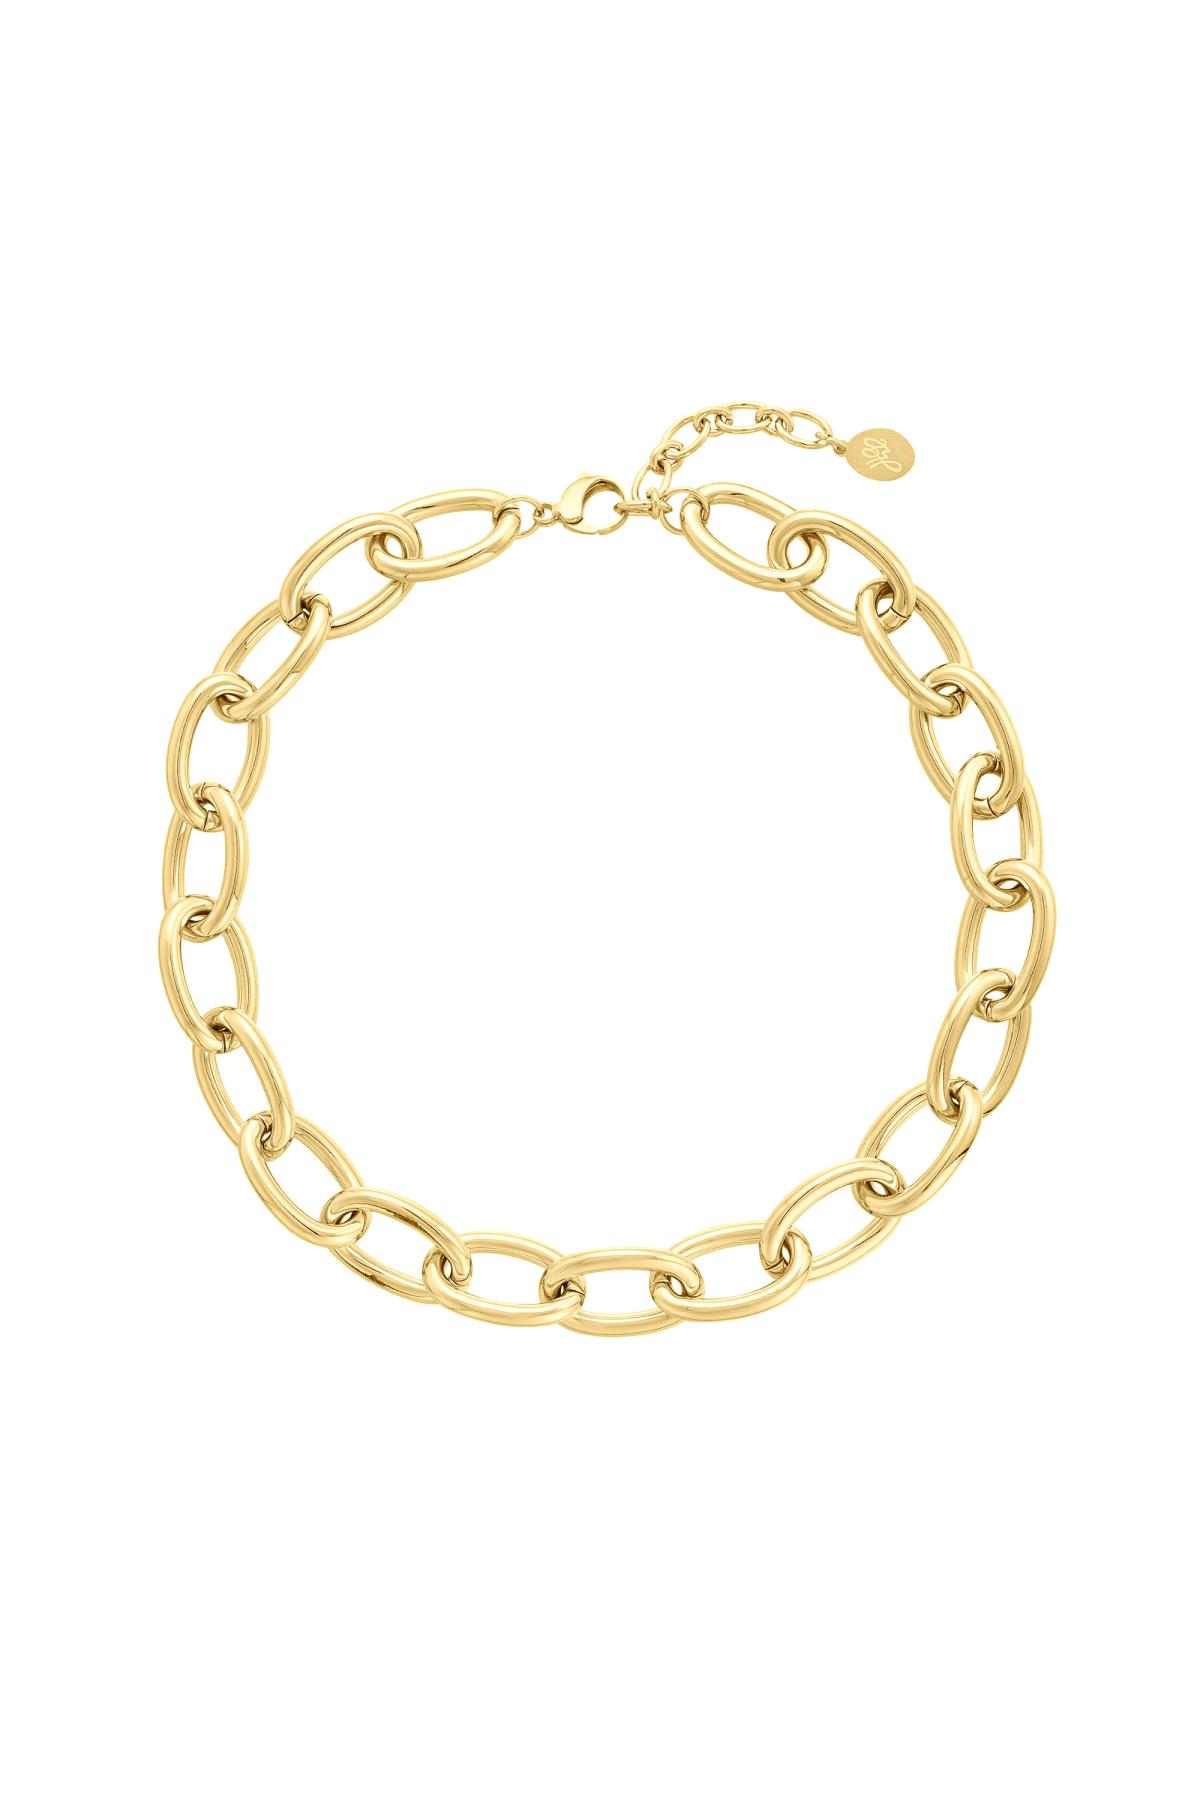 Chunky chain necklace with large links Gold Stainless Steel 